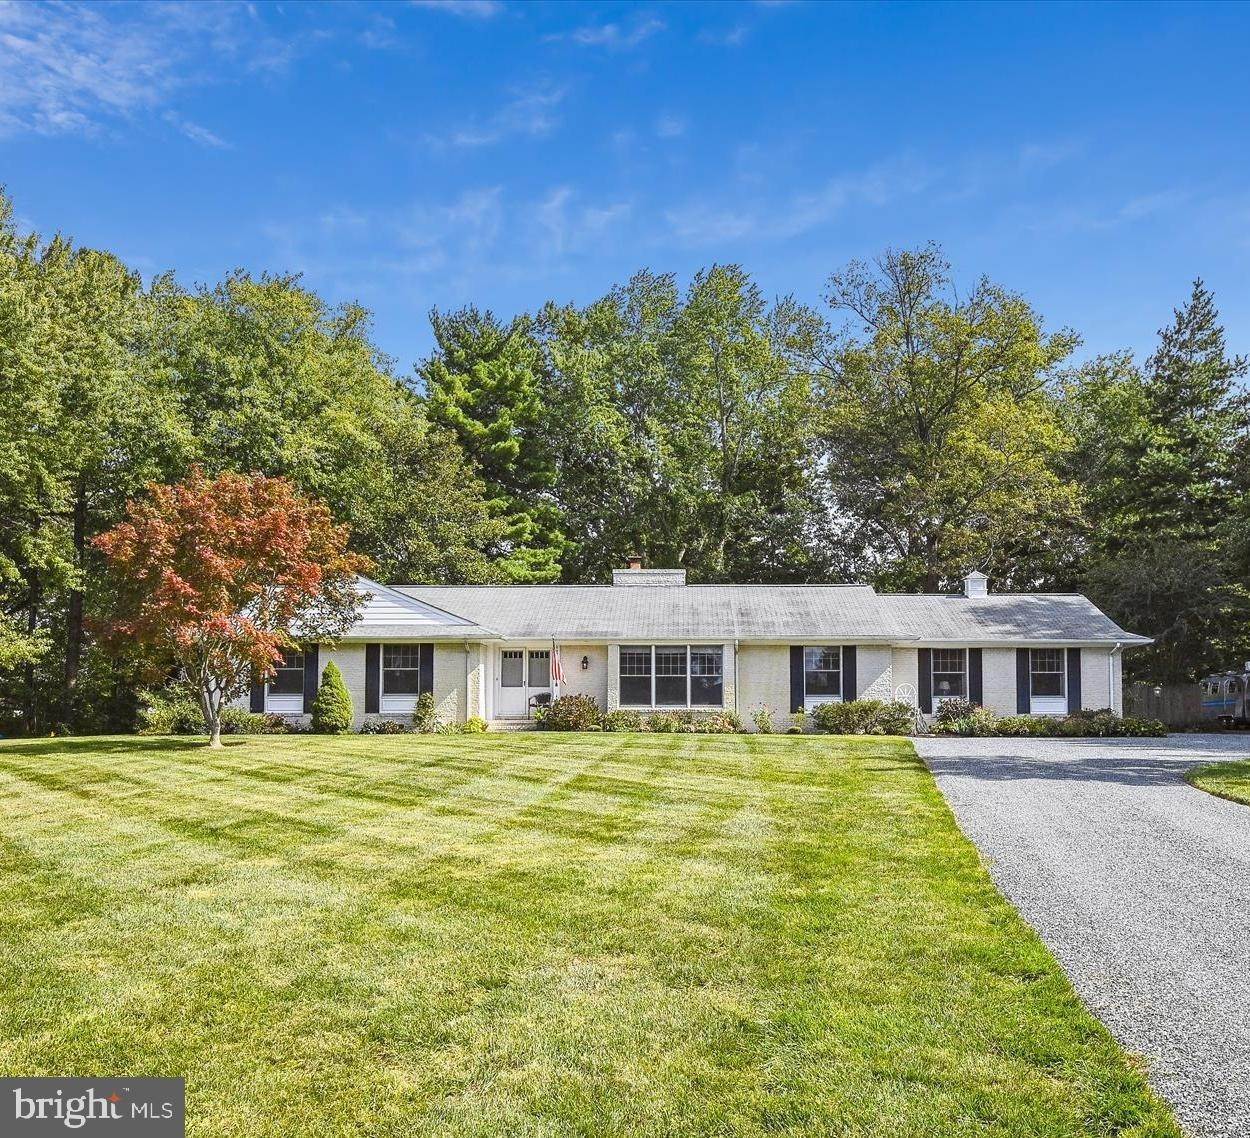 8. Single Family for Sale at Chester, MD 21619